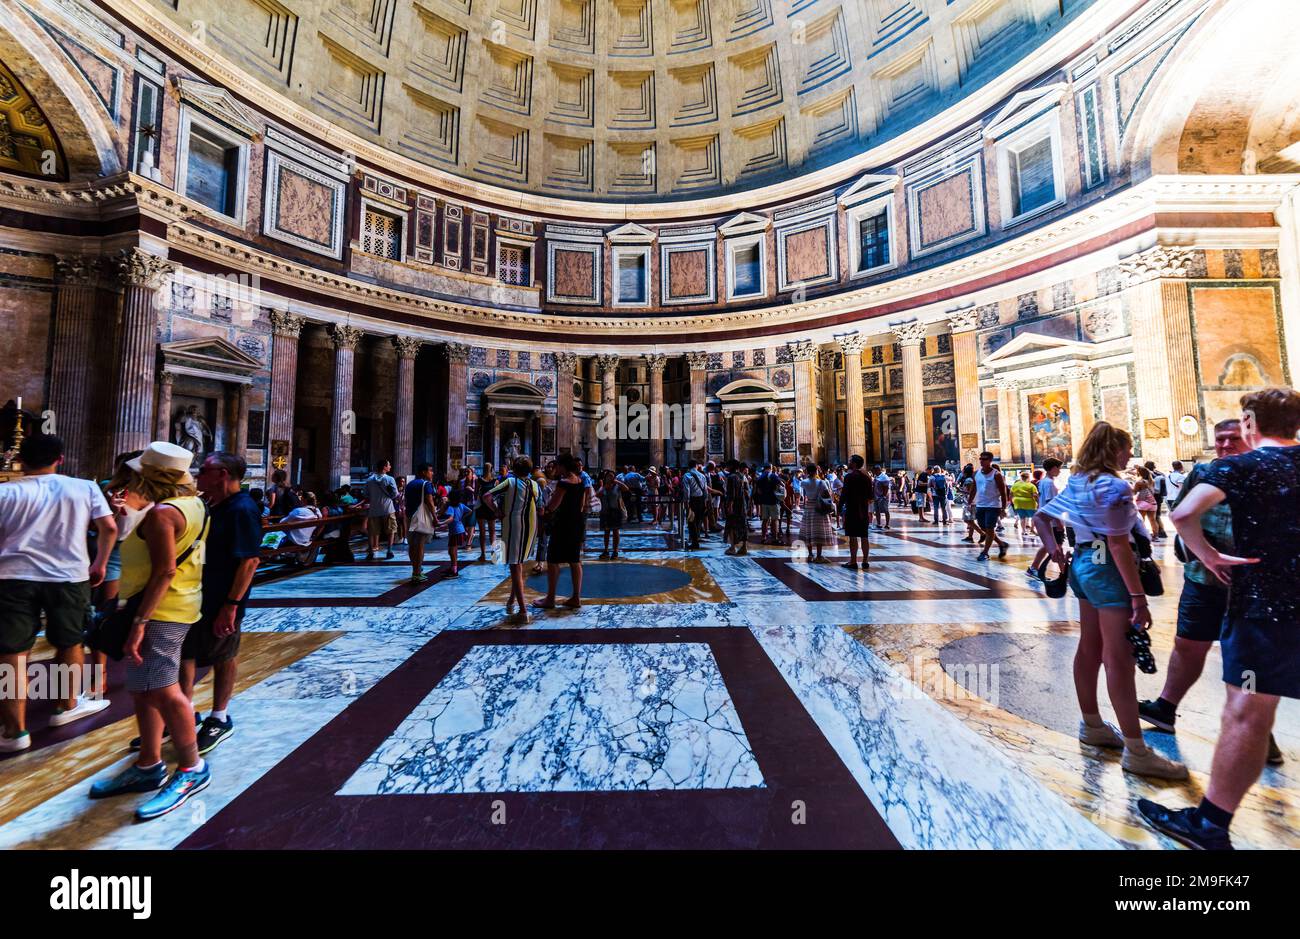 ROME, ITALY - JUNE 30, 2019: Interior view of PANTHEON (Ancient Roman Temple) in Rome center. People visit the Pantheon in Rome, Italy. Stock Photo